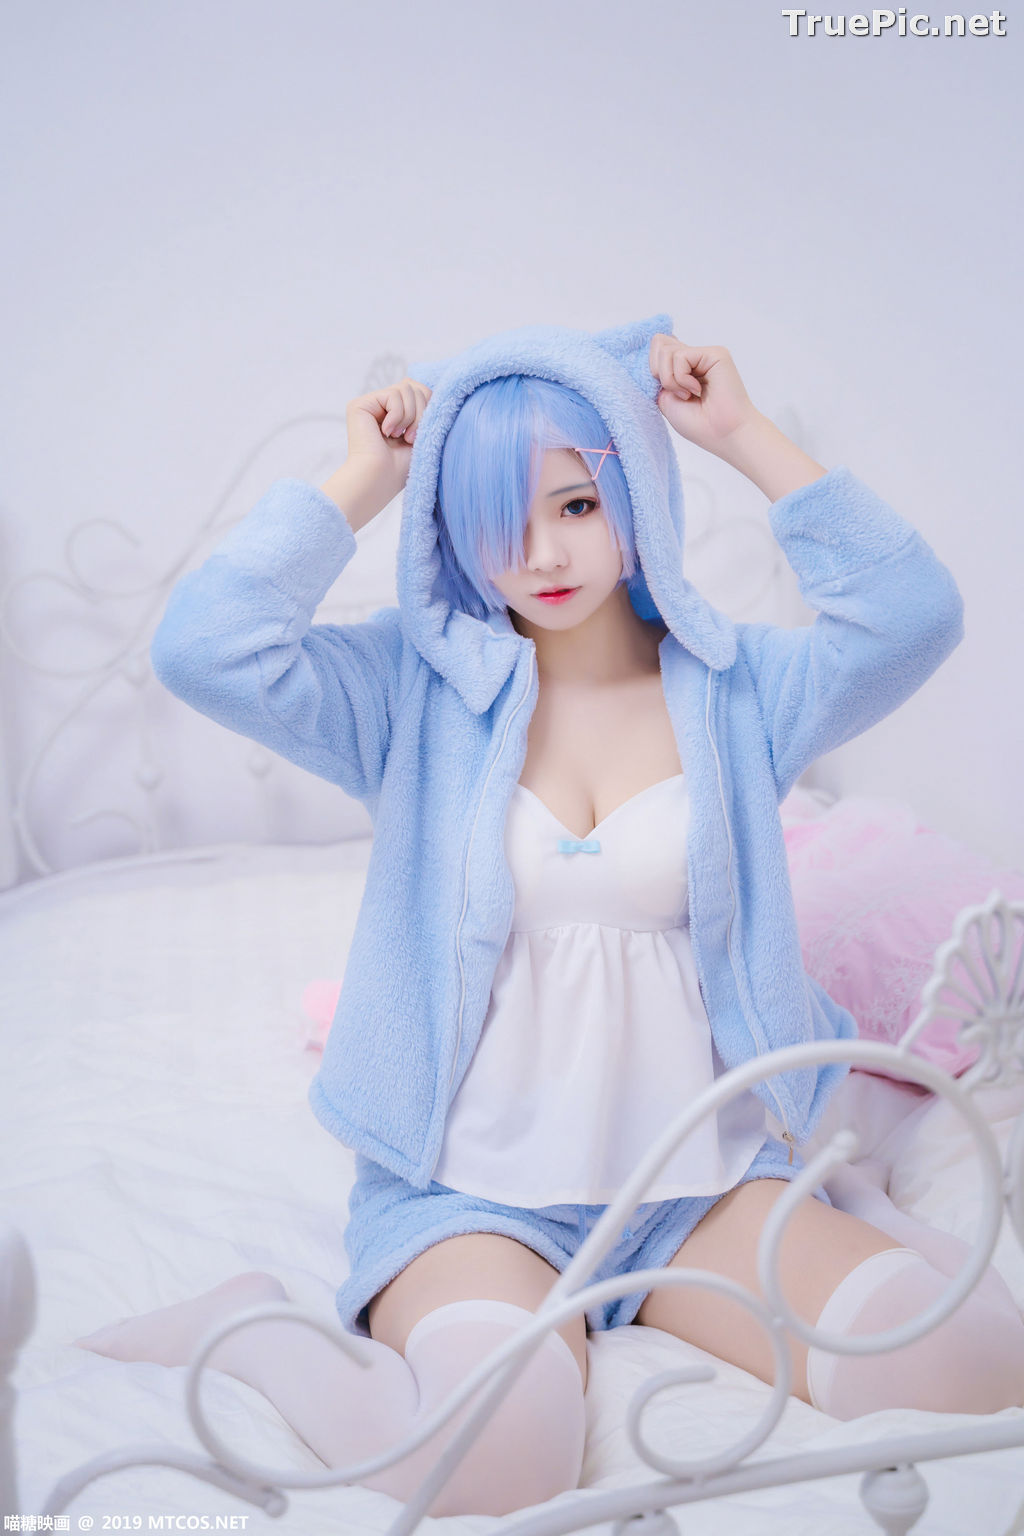 Image [MTCos] 喵糖映画 Vol.043 – Chinese Cute Model – Sexy Rem Cosplay - TruePic.net - Picture-27